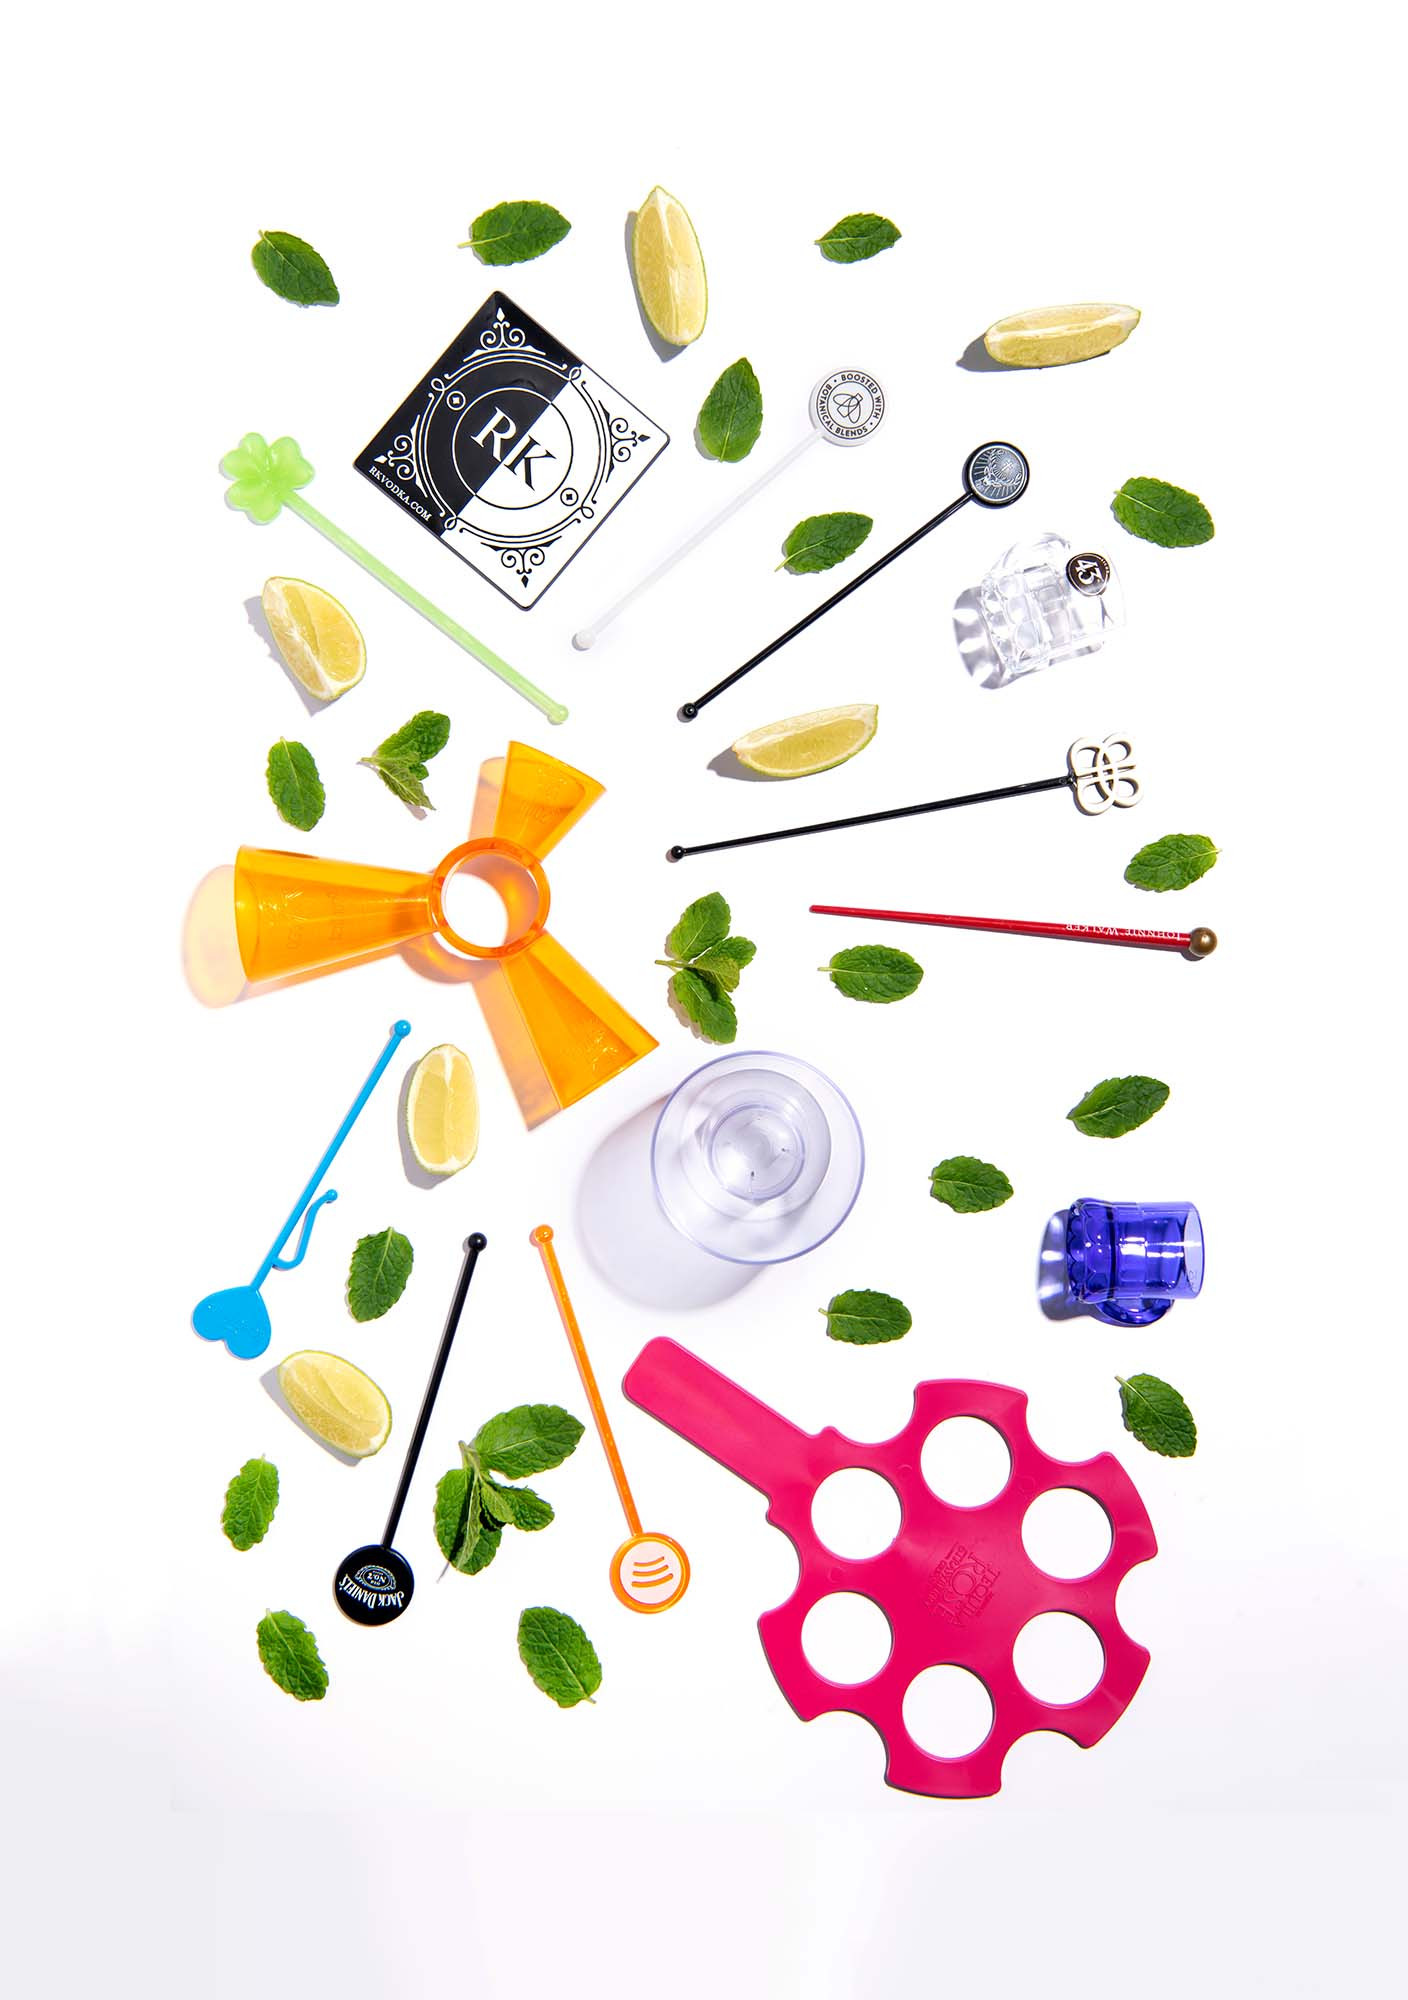 image of a number of different plastics products made by gcp